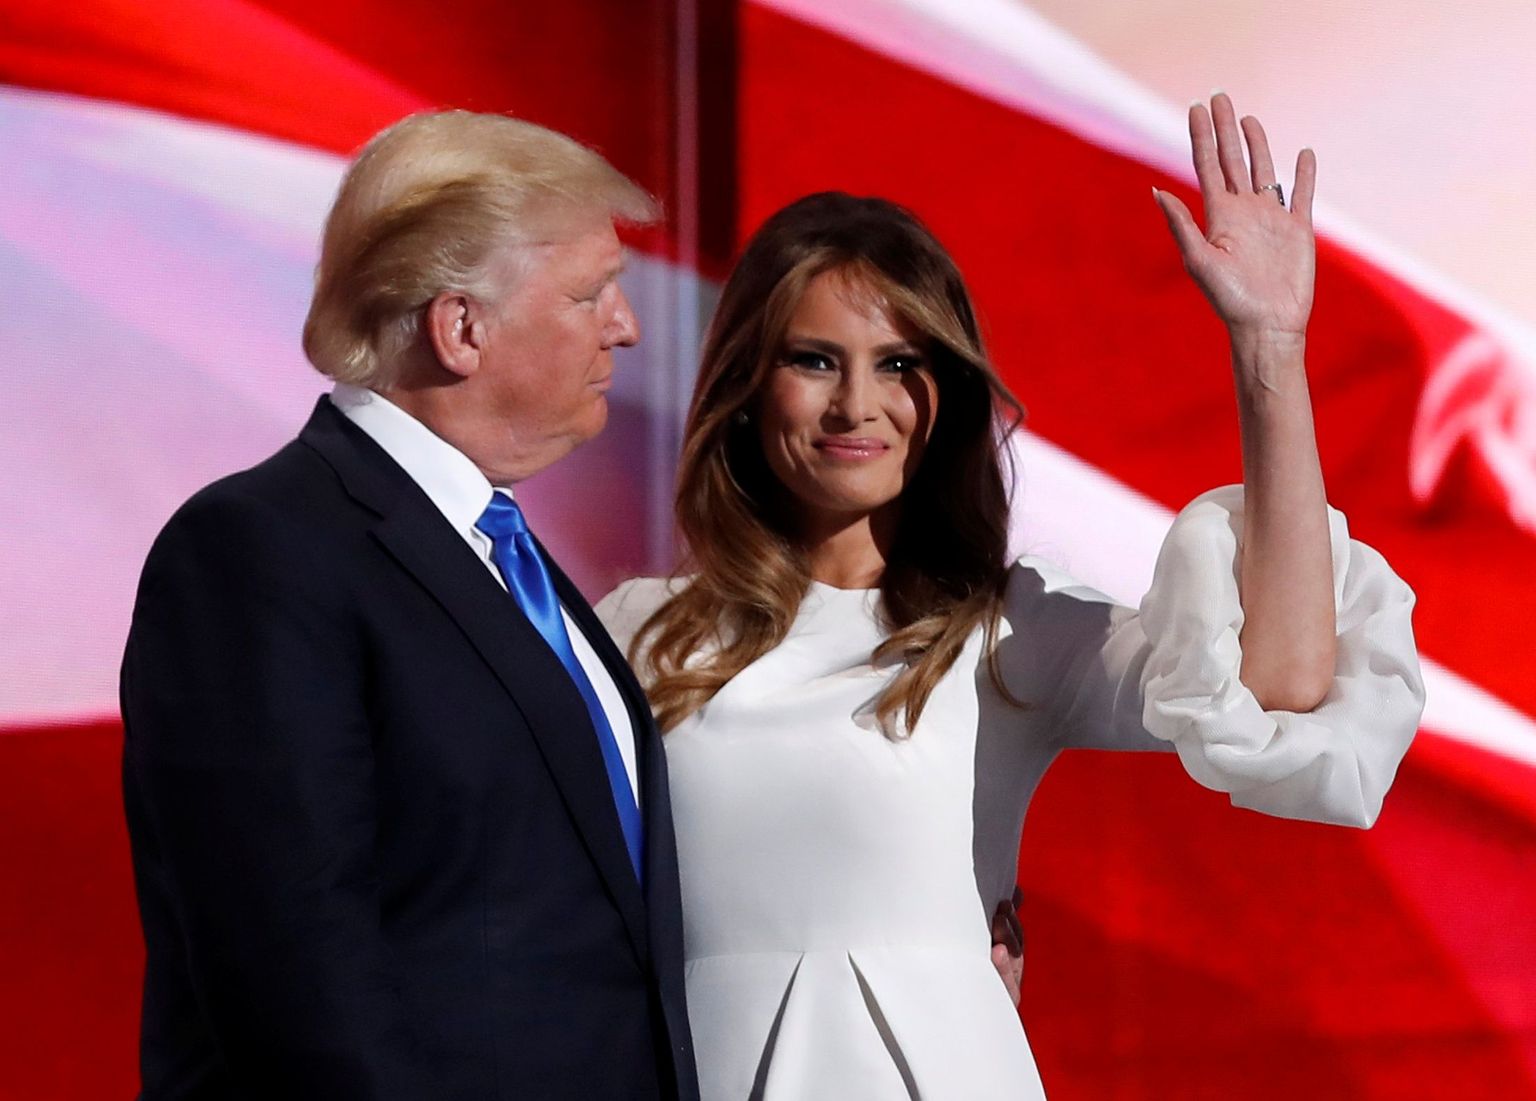 Melania Trump stands with her husband Republican U.S. presidential candidate Donald Trump at the Republican National Convention in Cleveland, Ohio, U.S. July 18, 2016. REUTERS/Mark Kauzlarich/File Photo